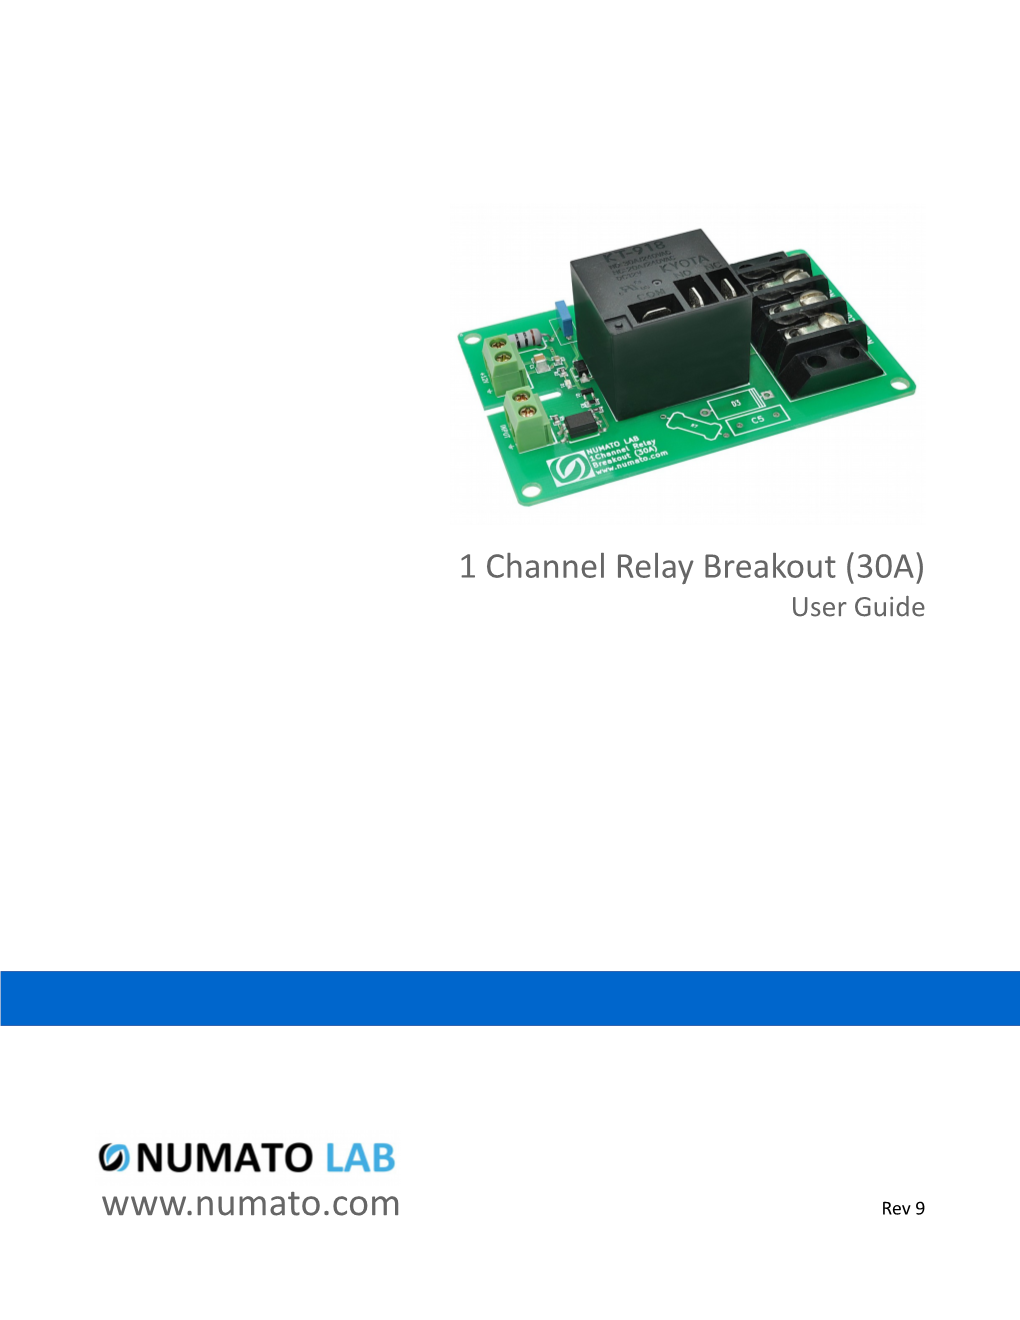 1 Channel Relay Breakout (30A) User Guide